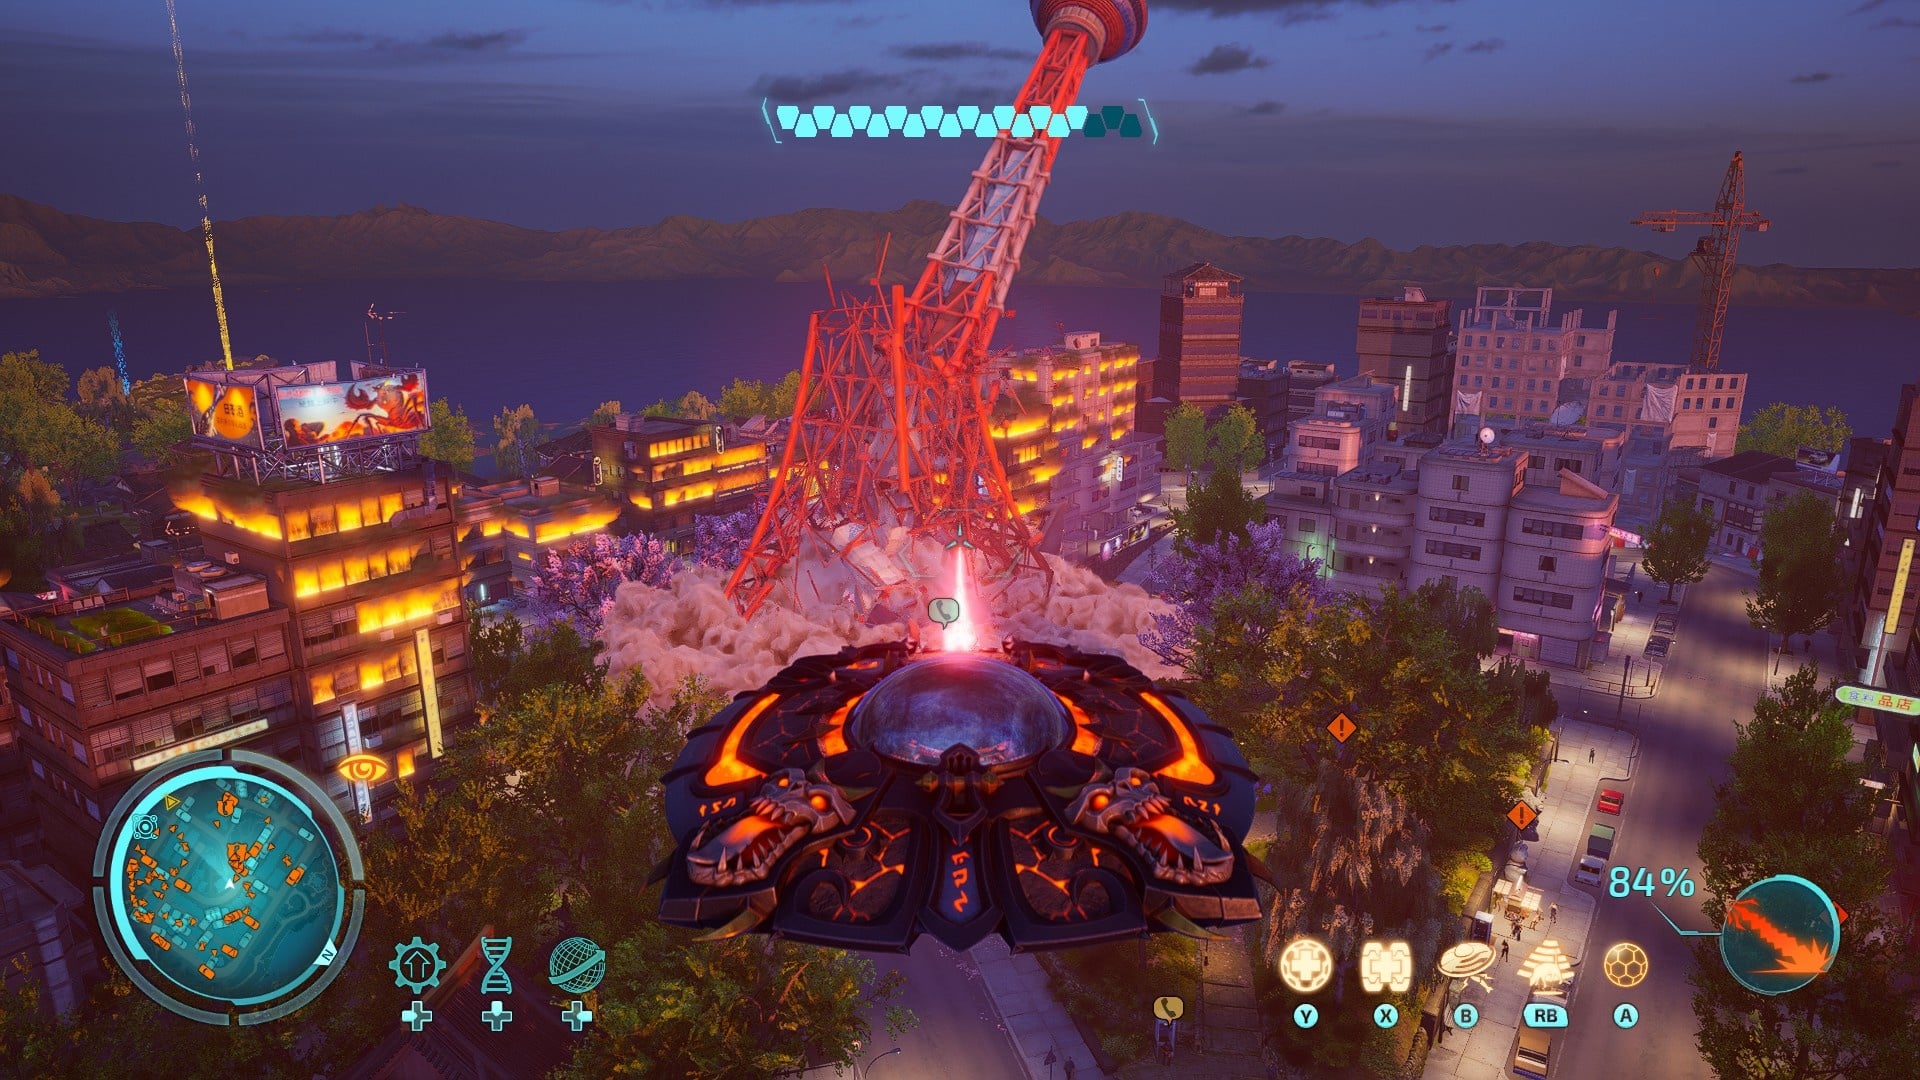 (With the flying saucer you can do a lot of good-looking damage that is inconsequential outside of special missions.)